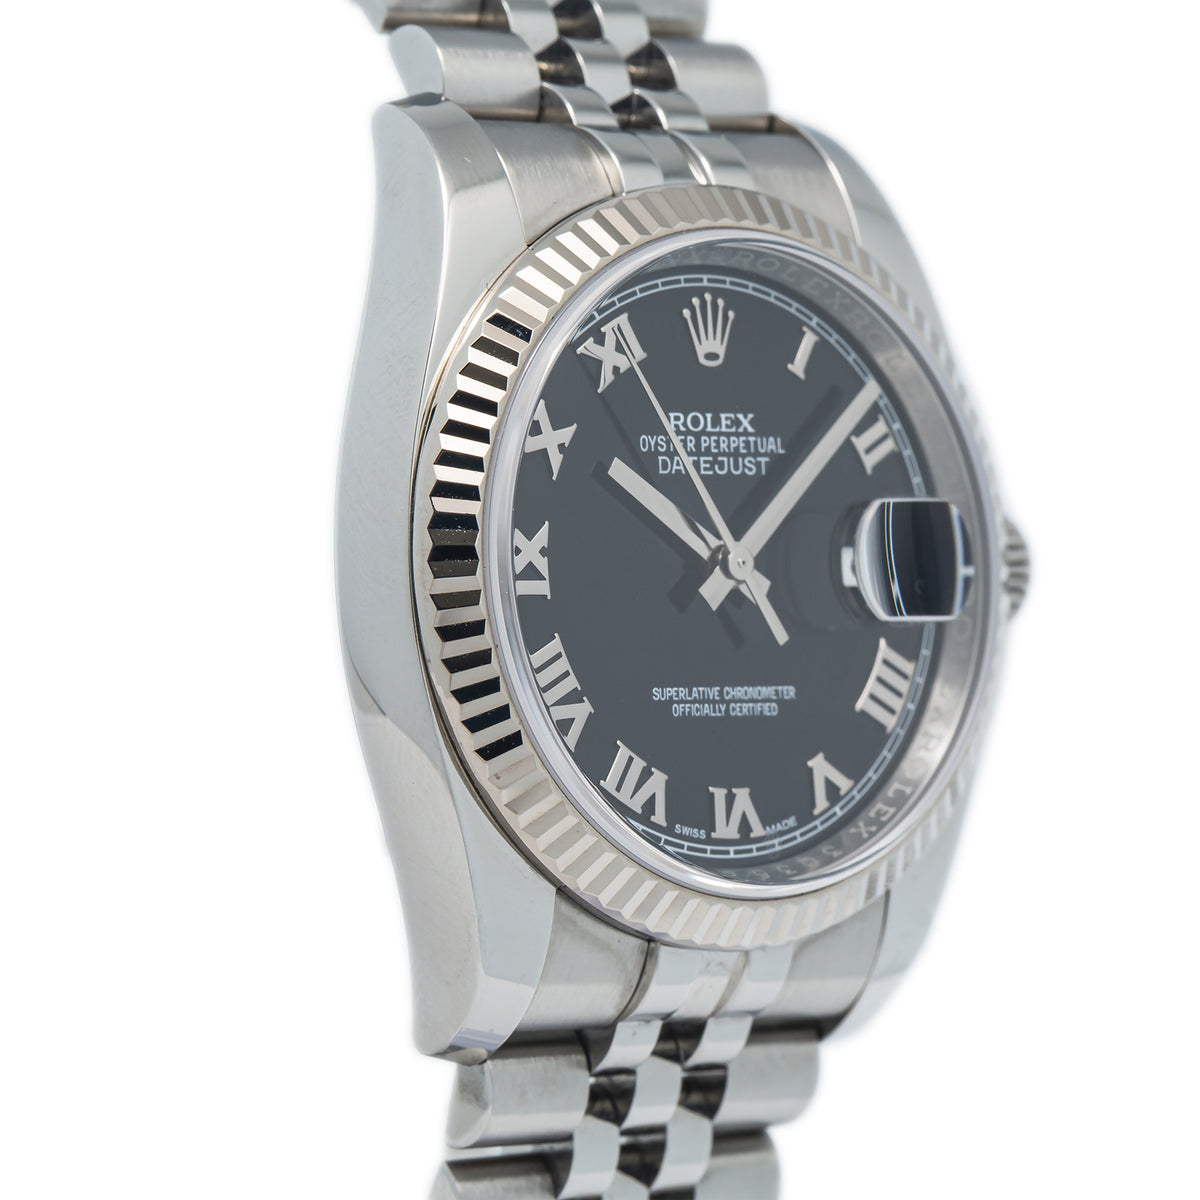 Rolex Datejust 116234 MINT 2016 Complete Stainless Jubilee Black Dial Watch 36mm